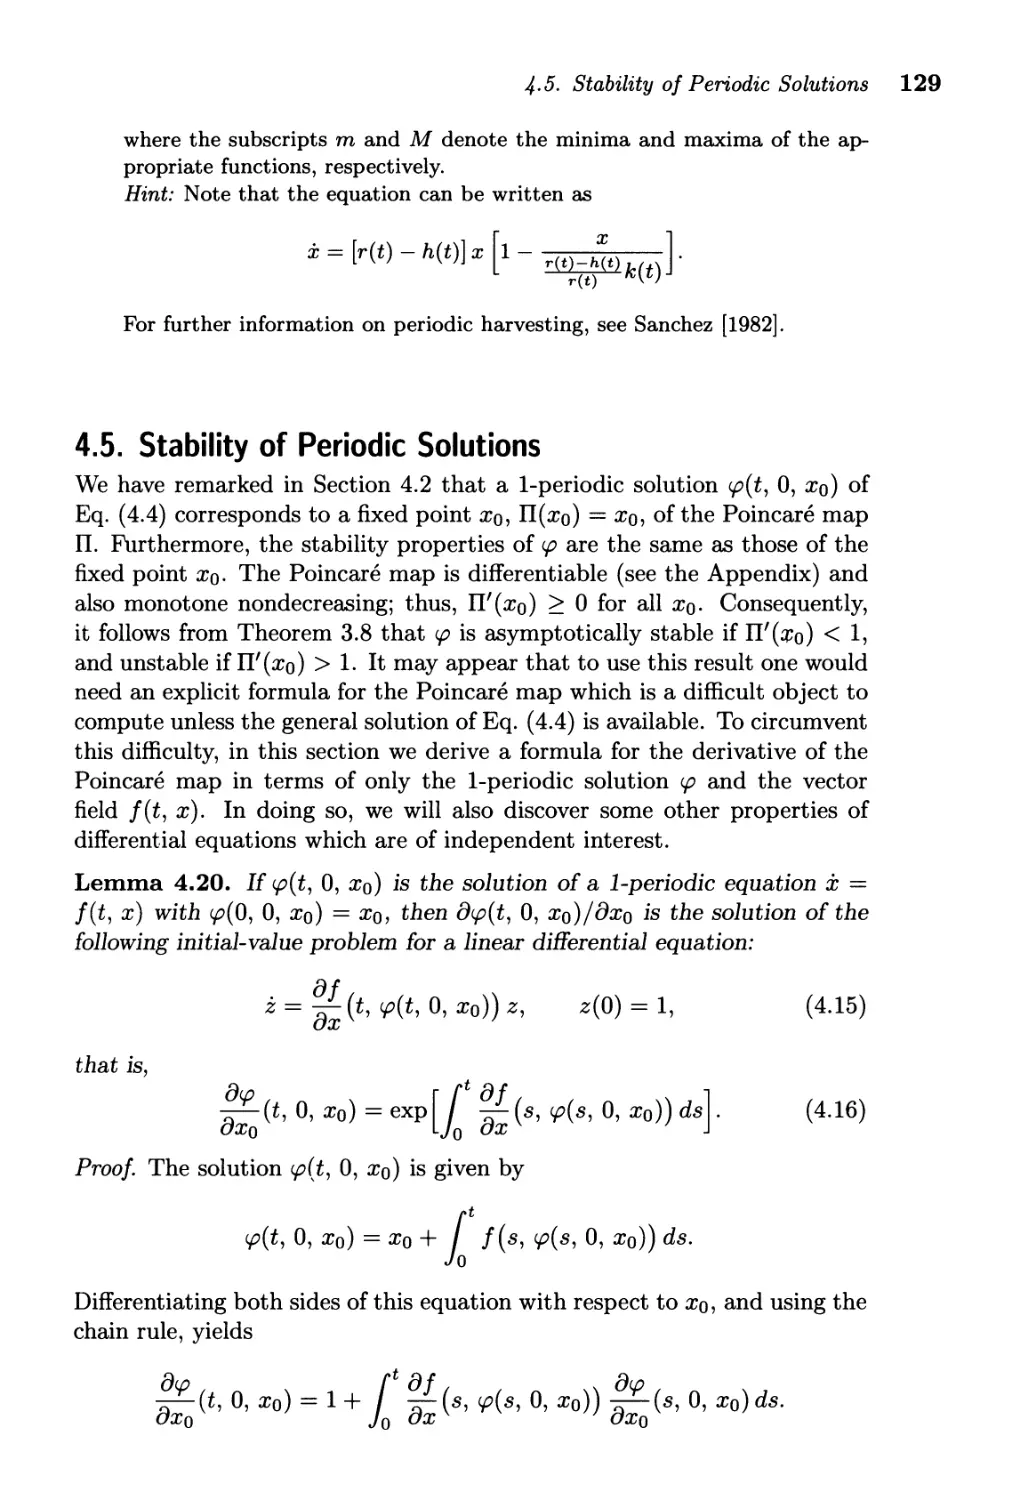 4.5. Stability of Periodic Solutions